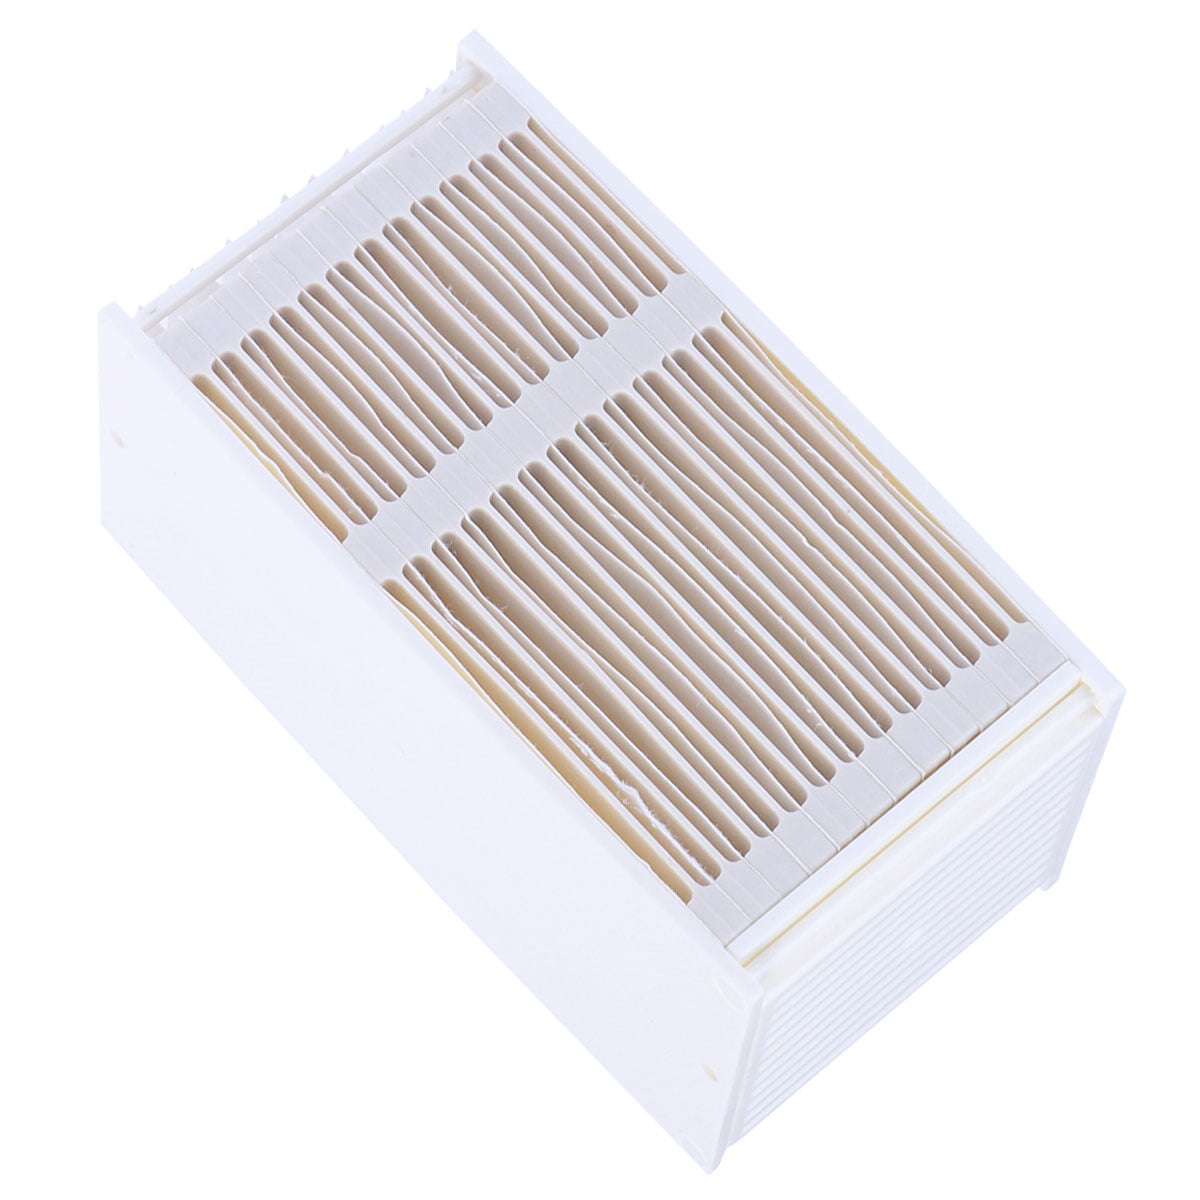 Vosarea Nano Replacement Filter for Personal Space Cooler Air Cooler Cooling Fan White 